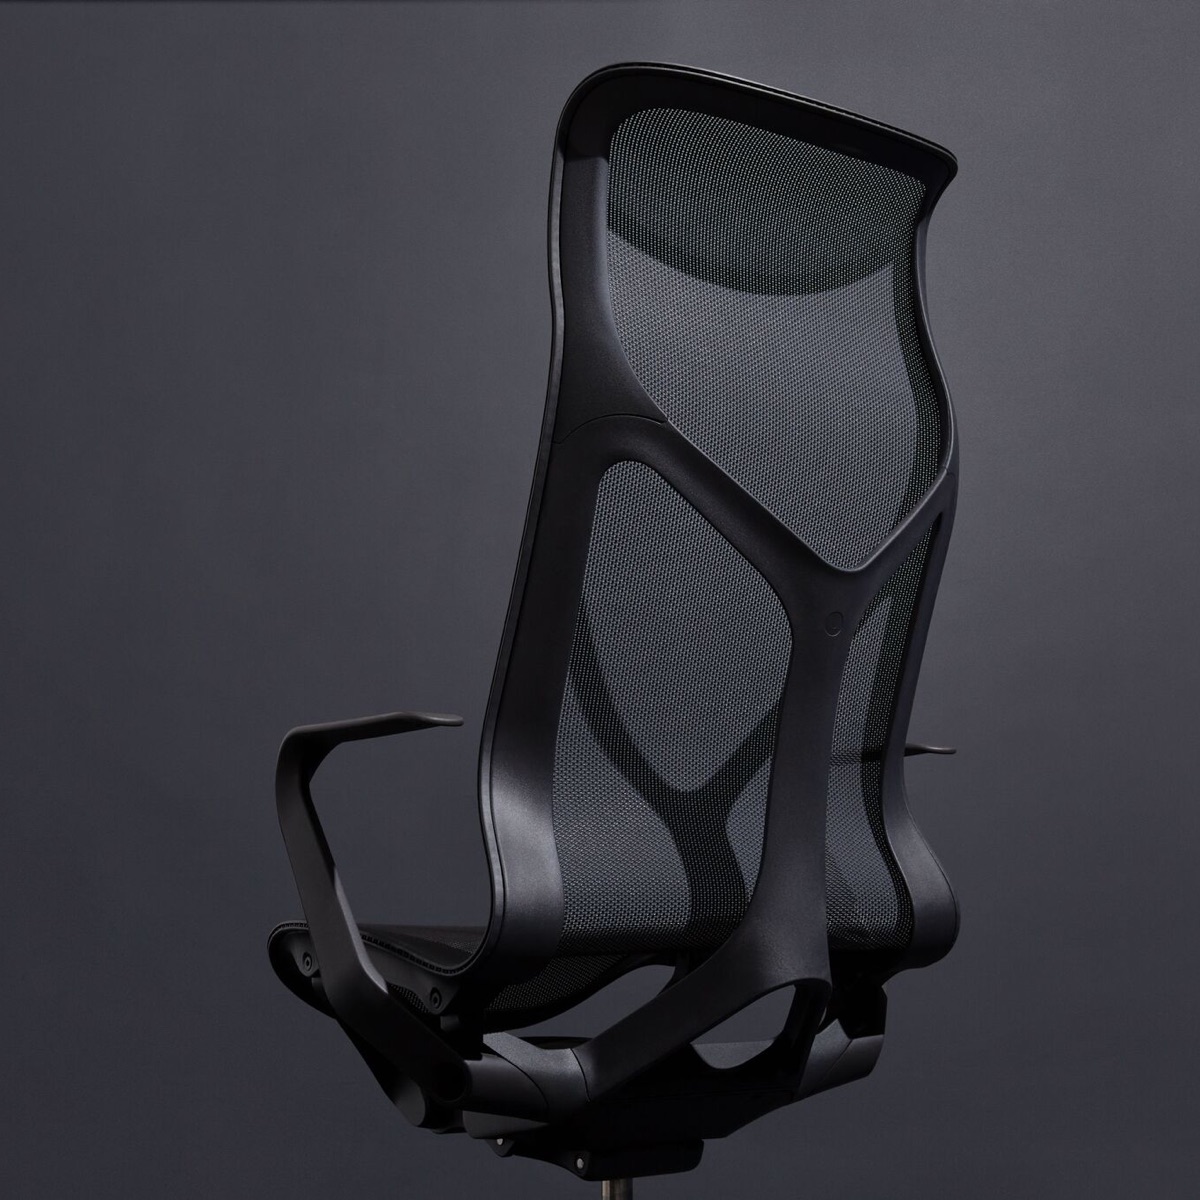 A Graphite dark grey Cosm high-back ergonomic desk chair with fixed arms on a dark grey background.